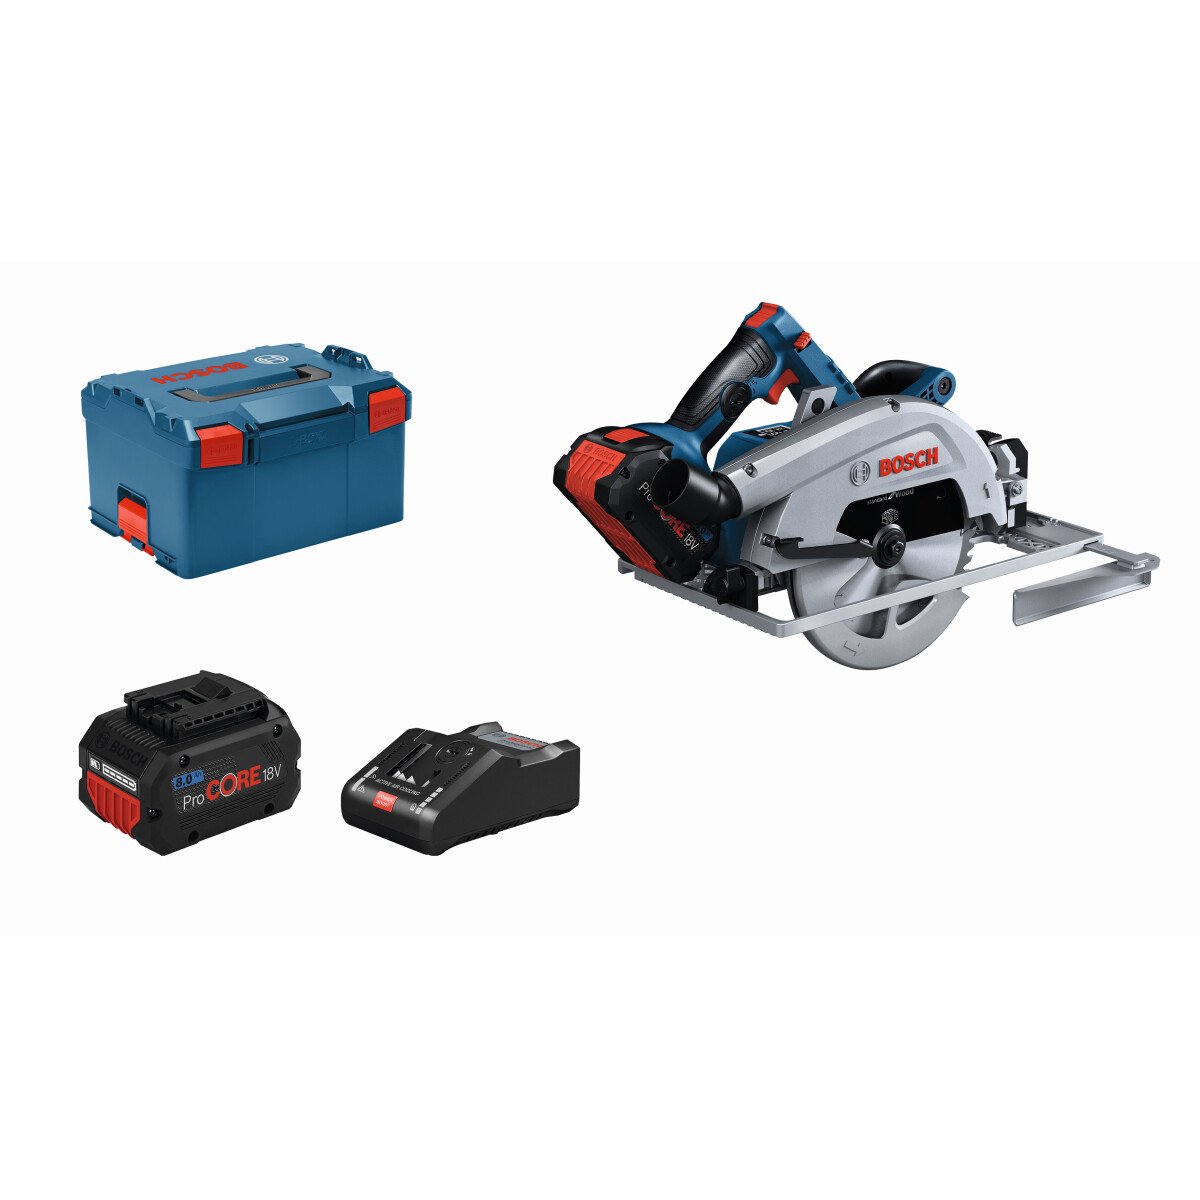 Bosch GKS 18V-68 GC 18V BITURBO BRUSHLESS Guide Rail Compatible Circular Saw 190mm Connection Ready (2x5.5Ah ProCORE18V Batteries) in L-Boxx